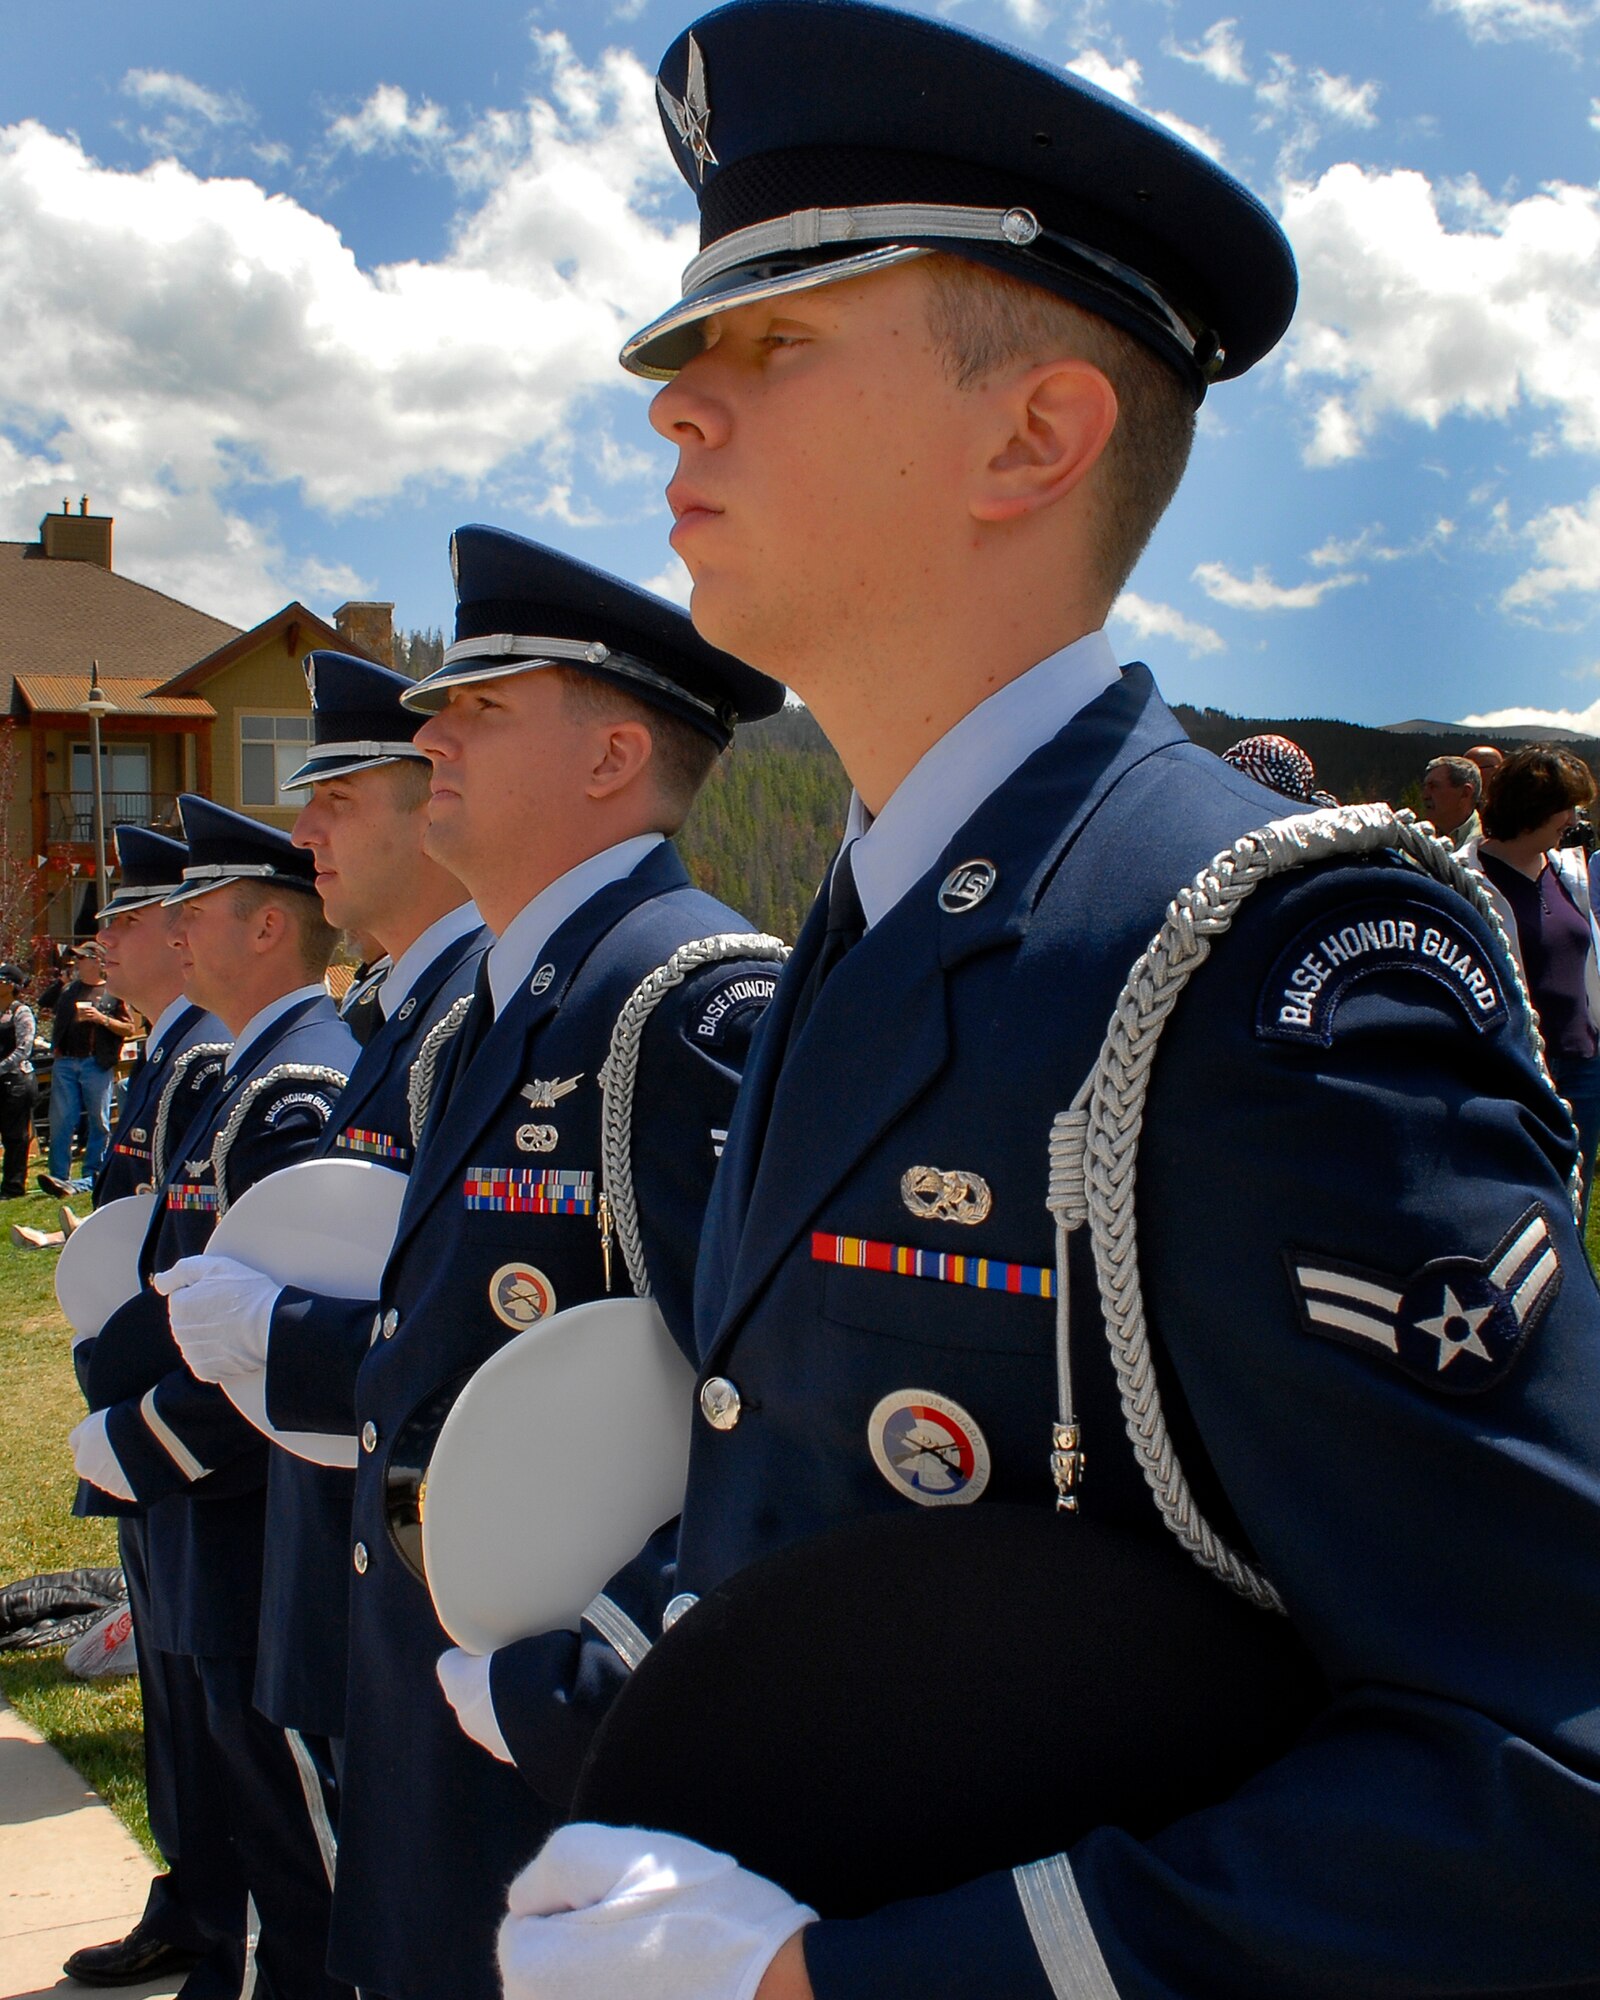 Mile High Honor Guard members stand at attention prior to performing a prisoner of war and missing in action ceremony at the Salute to American Veterans Rally and Festival in Winter Park, Colo, Aug. 15. (U.S. Air Force photo by Tech. Sgt. J. LaVoie)